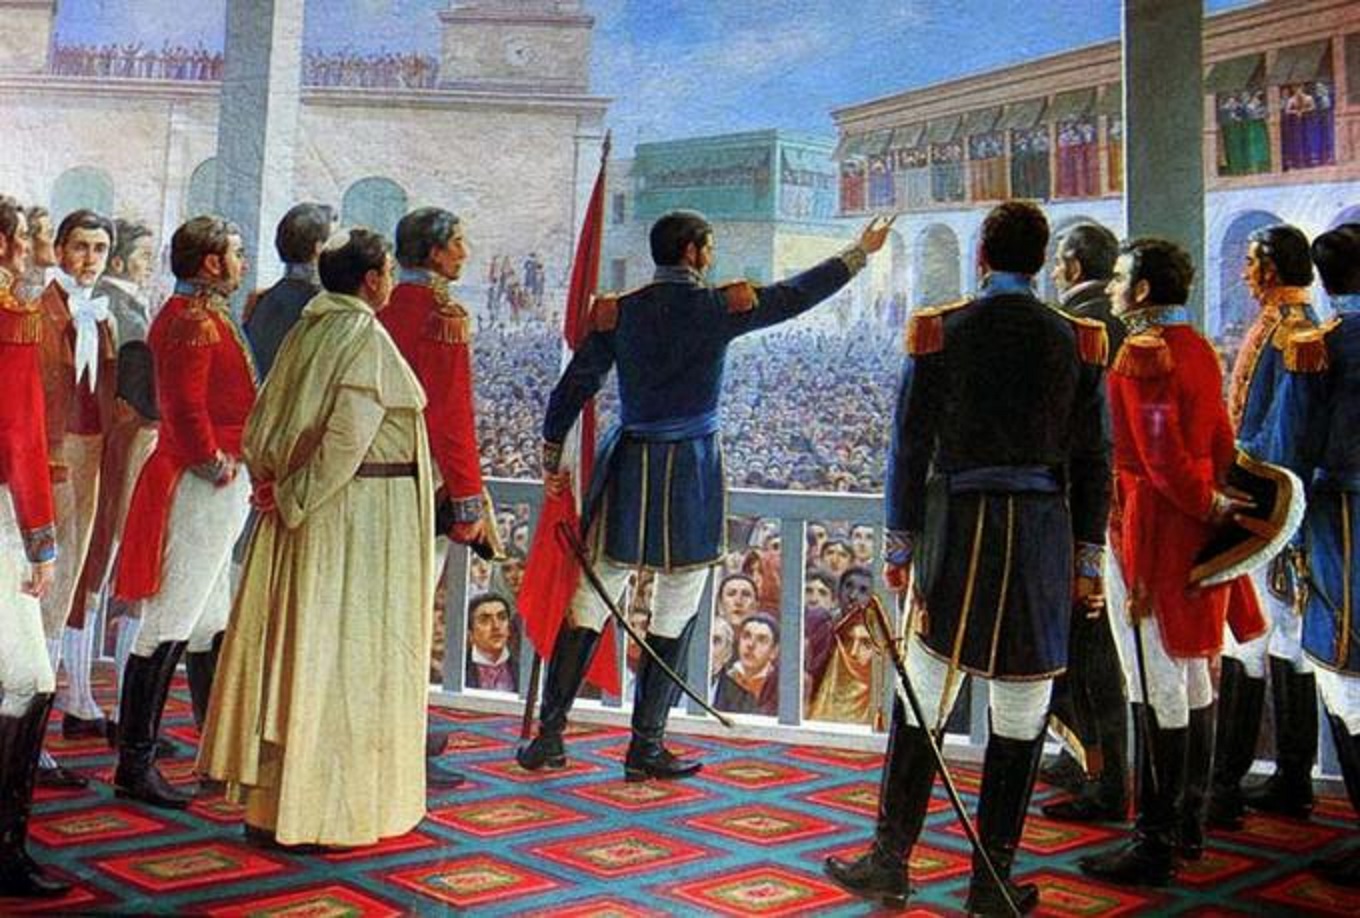 Dominican Republic will mark a 3rd declaration of Independence